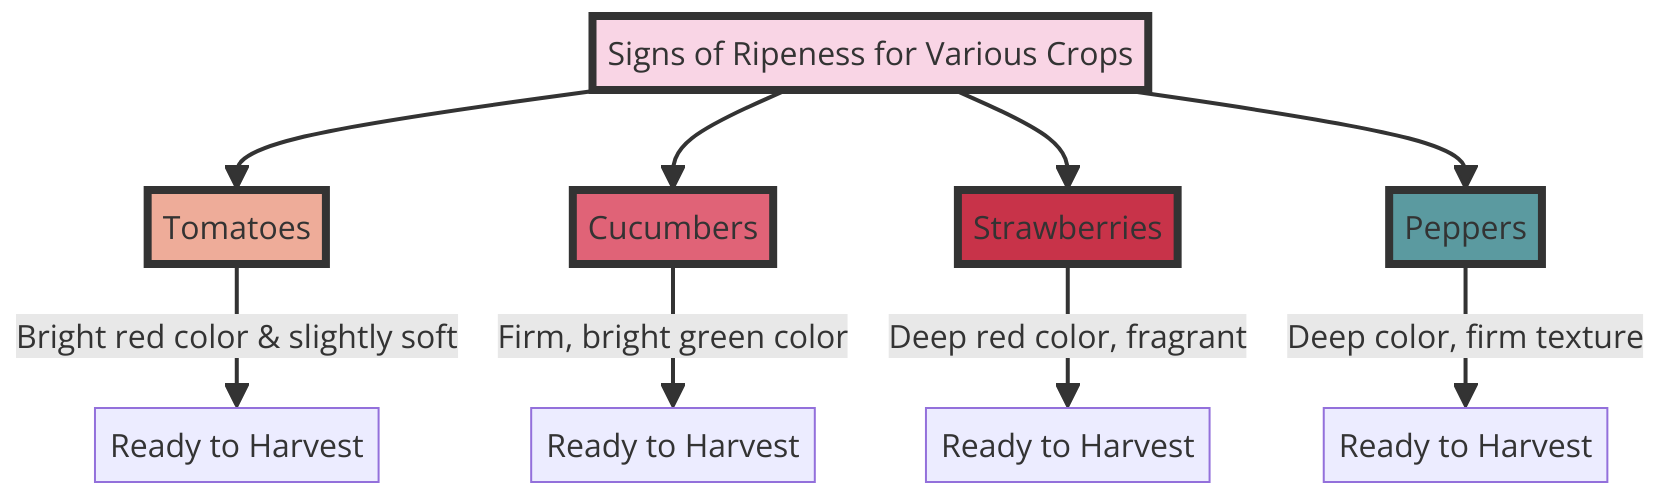 signs of ripeness for various crops, designed to help gardeners identify the optimal time for harvesting each type